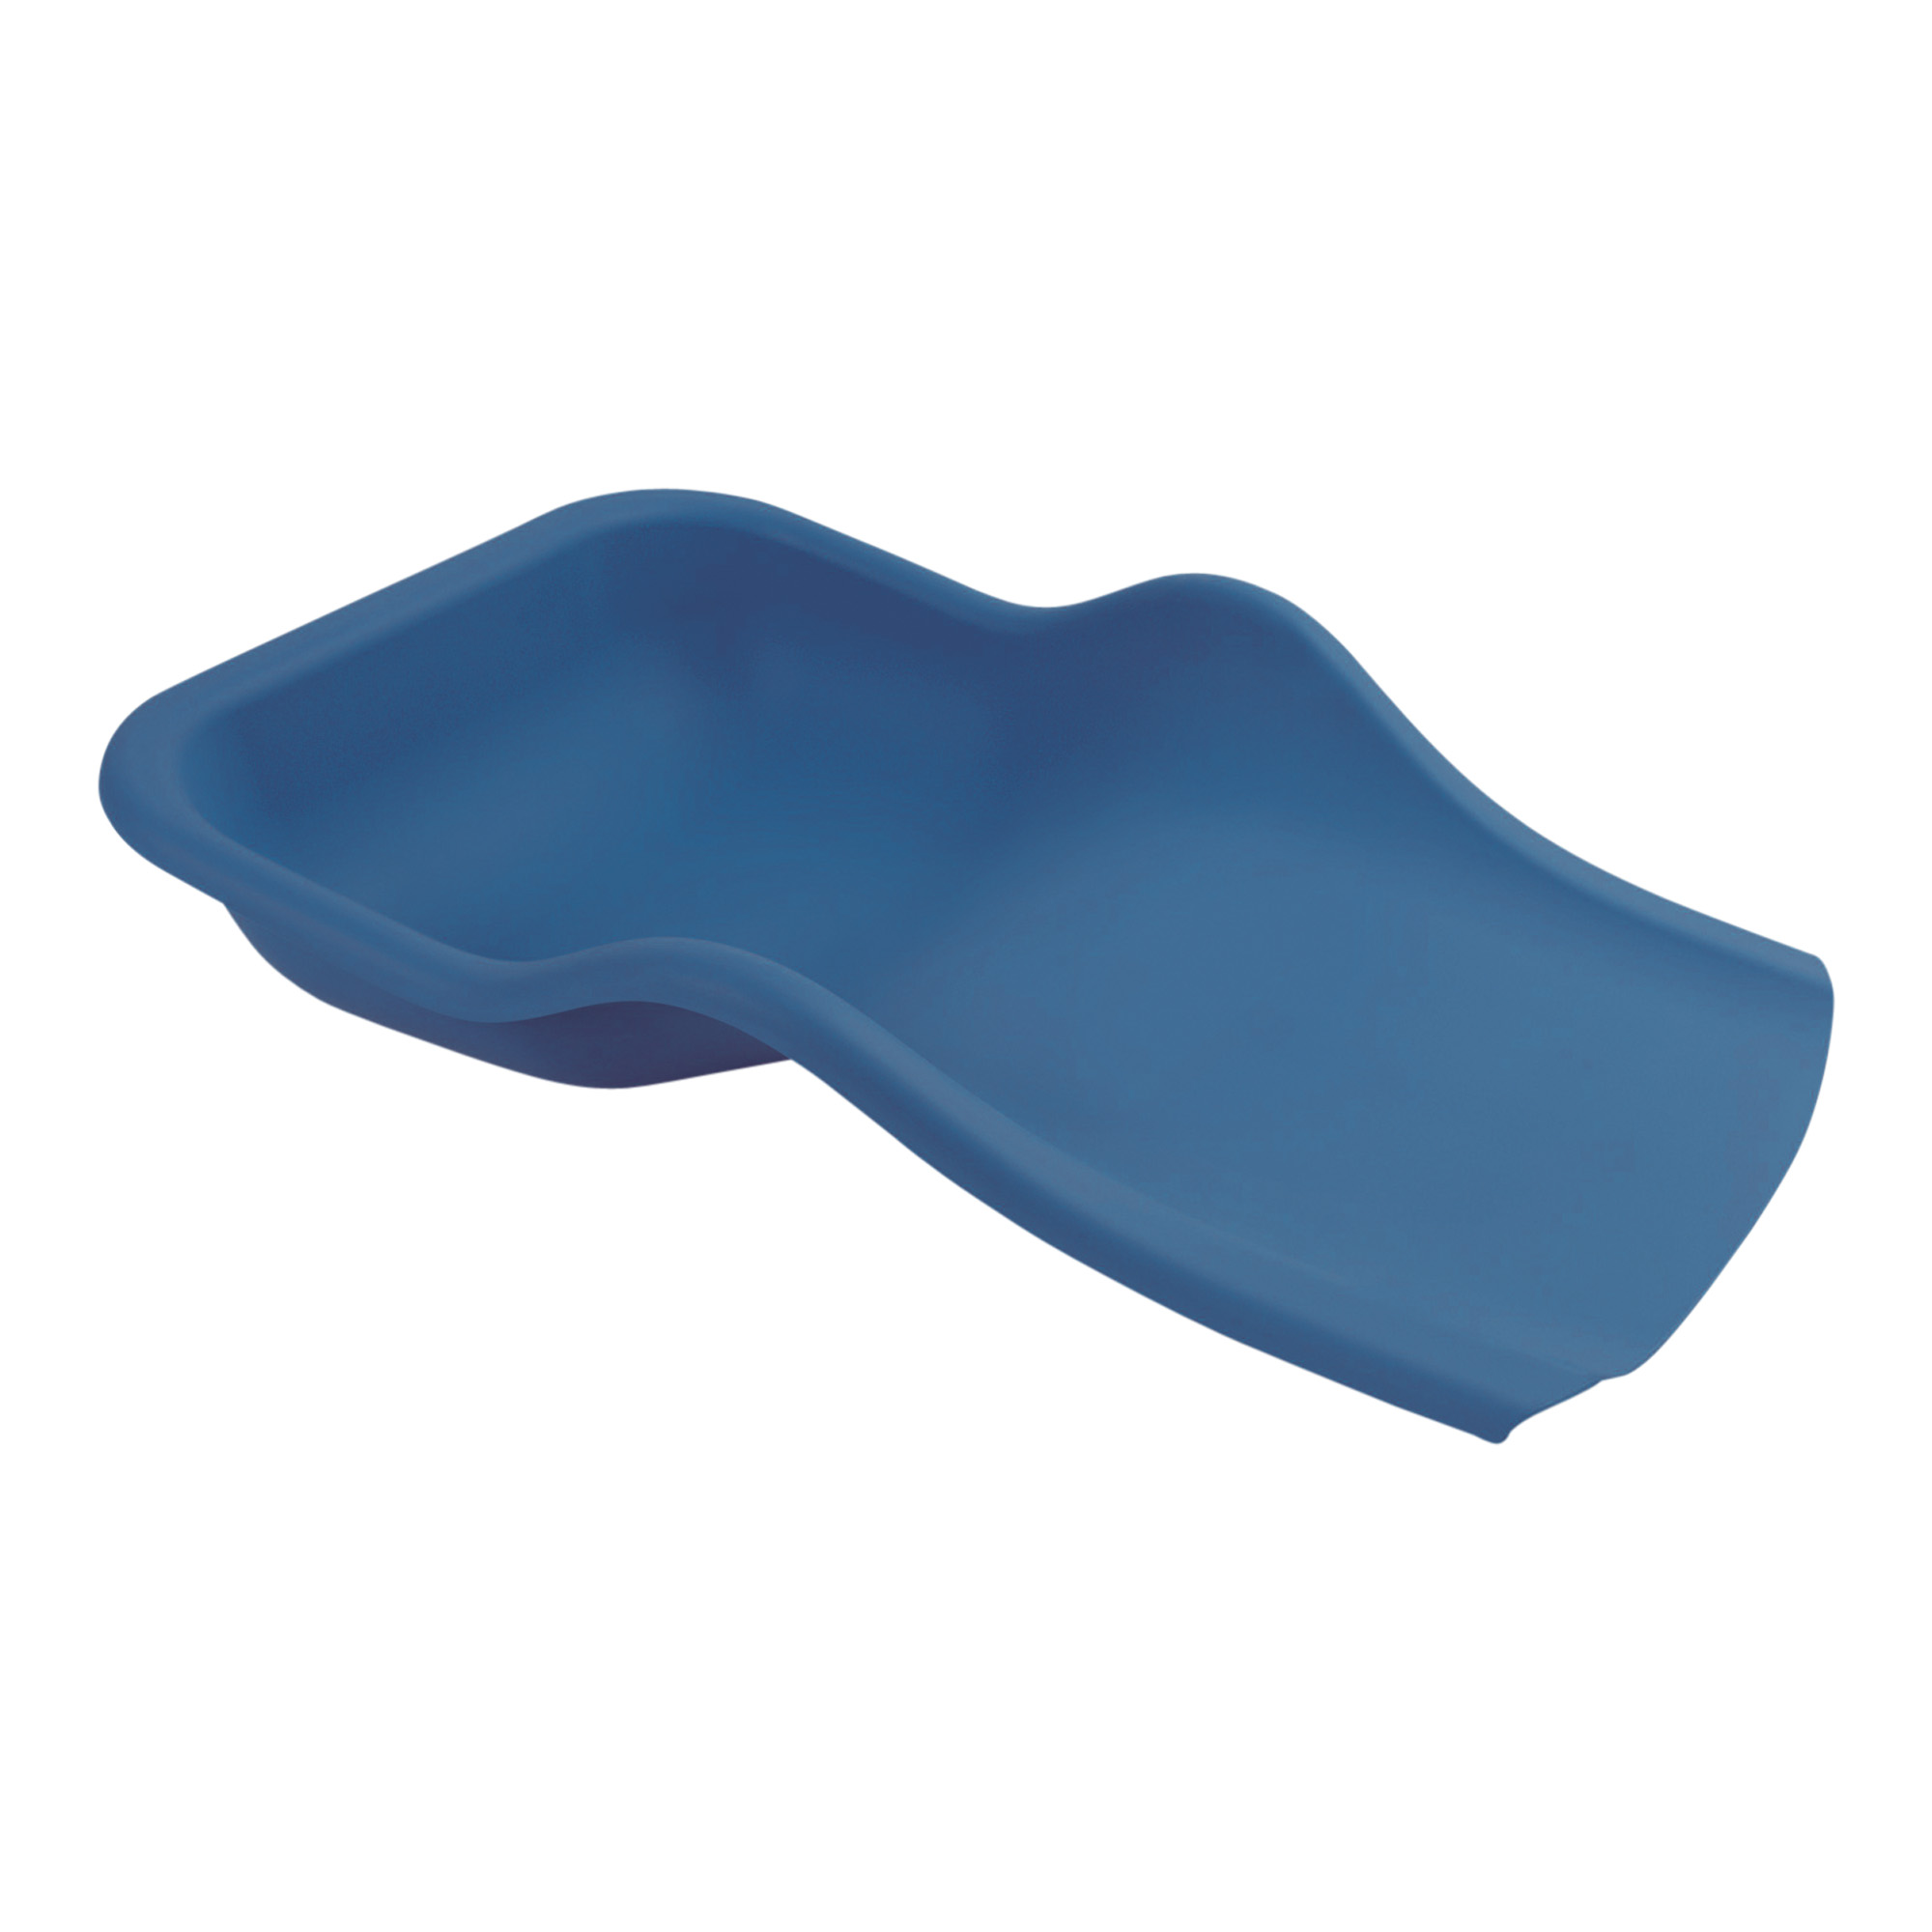 Flexible tray for the collection of pedicure residues on the foot dark blue-green